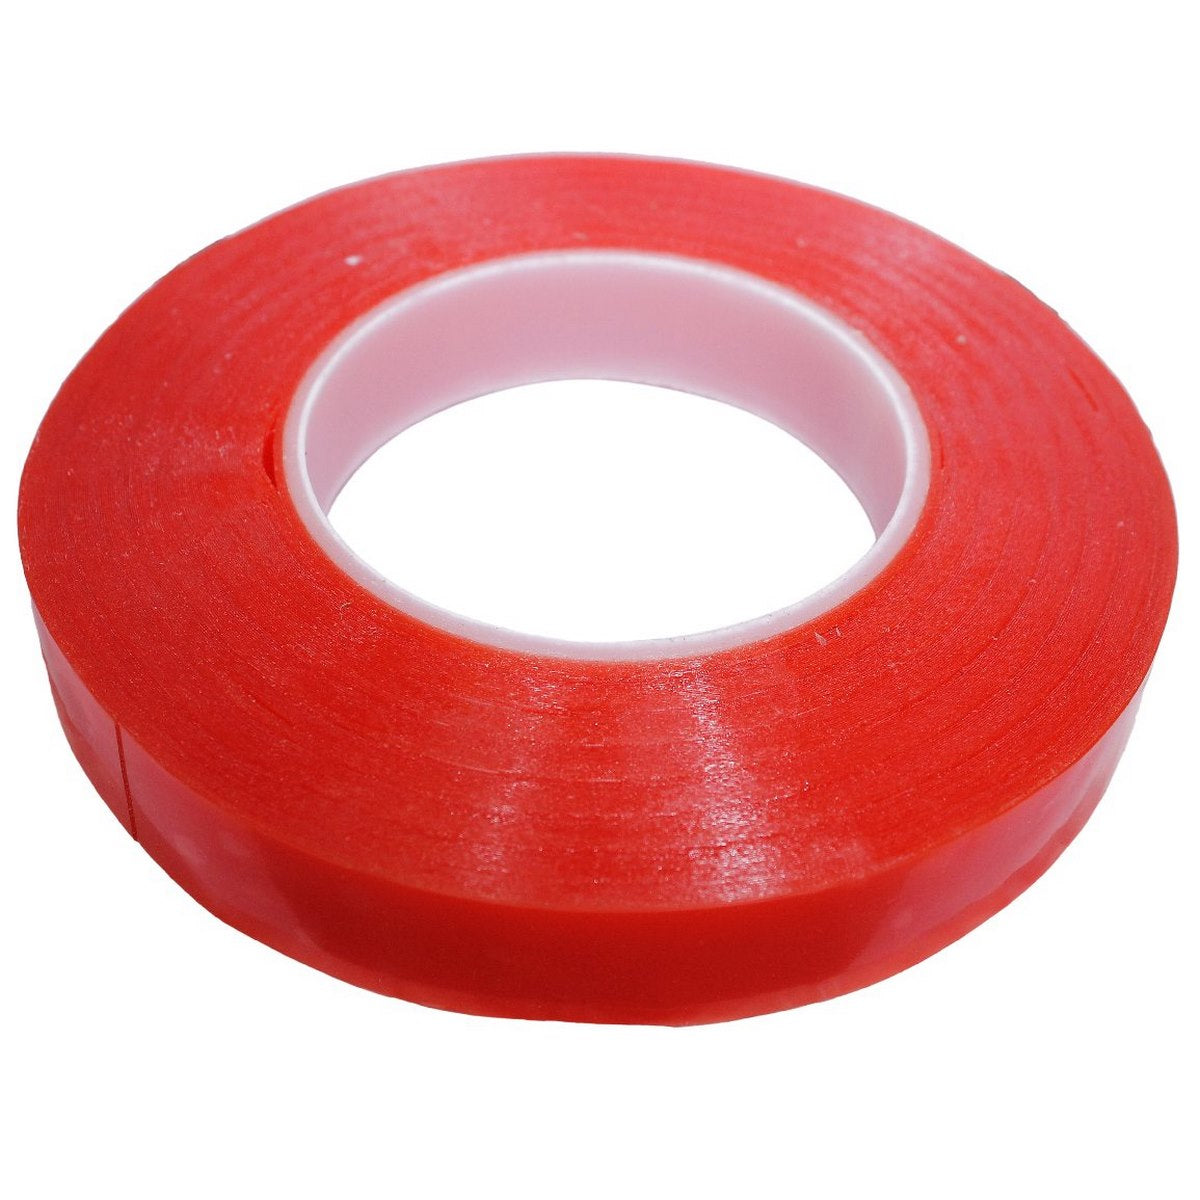 jags-mumbai Two way tape Tape Double Sided Red 1 Inch CC 24mm 50mtr